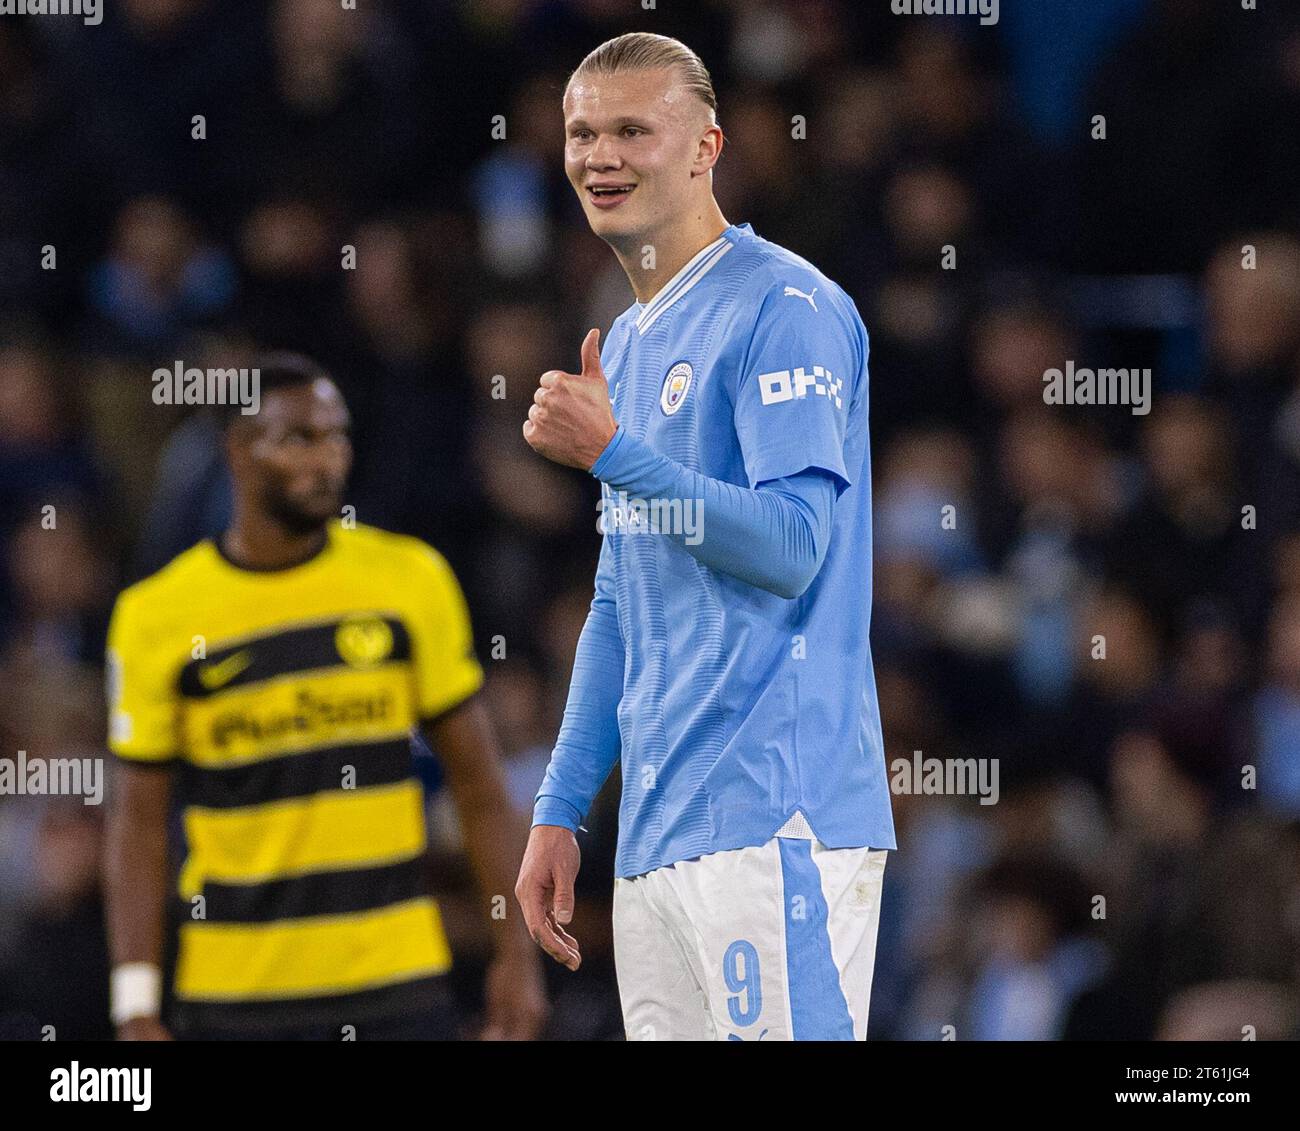 Manchester, UK. 8th Nov, 2023. Manchester City's Erling Haaland celebrates after scoring during the UEFA Champions League Group G match between Manchester City FC and BSC Young Boys in Manchester, Britain, on Nov. 7, 2023. Credit: Xinhua/Alamy Live News Stock Photo